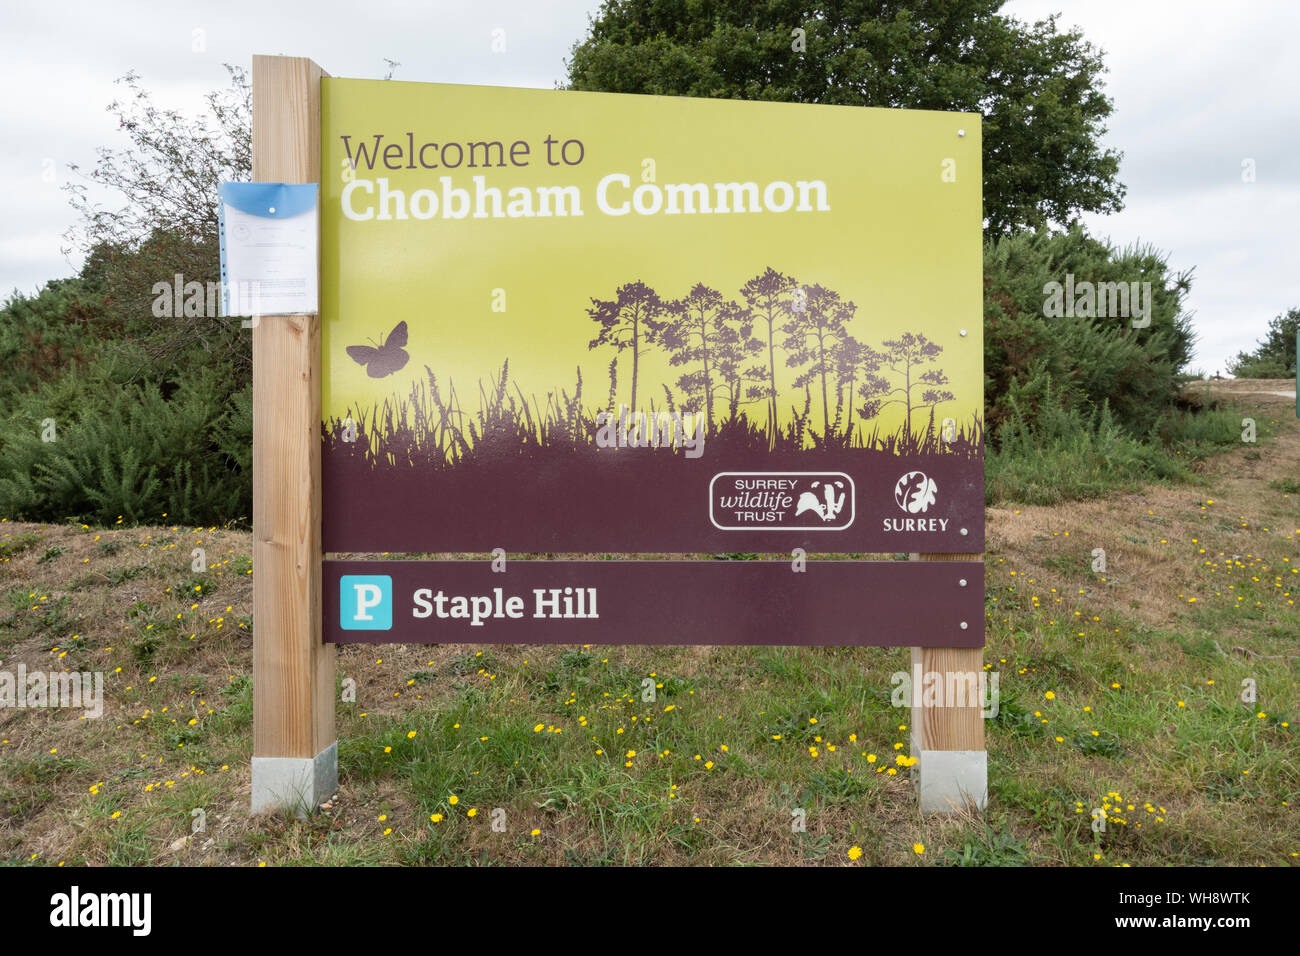 Chobham Common welcome sign, an area of lowland heath and a National Nature Reserve, Surrey, UK Stock Photo